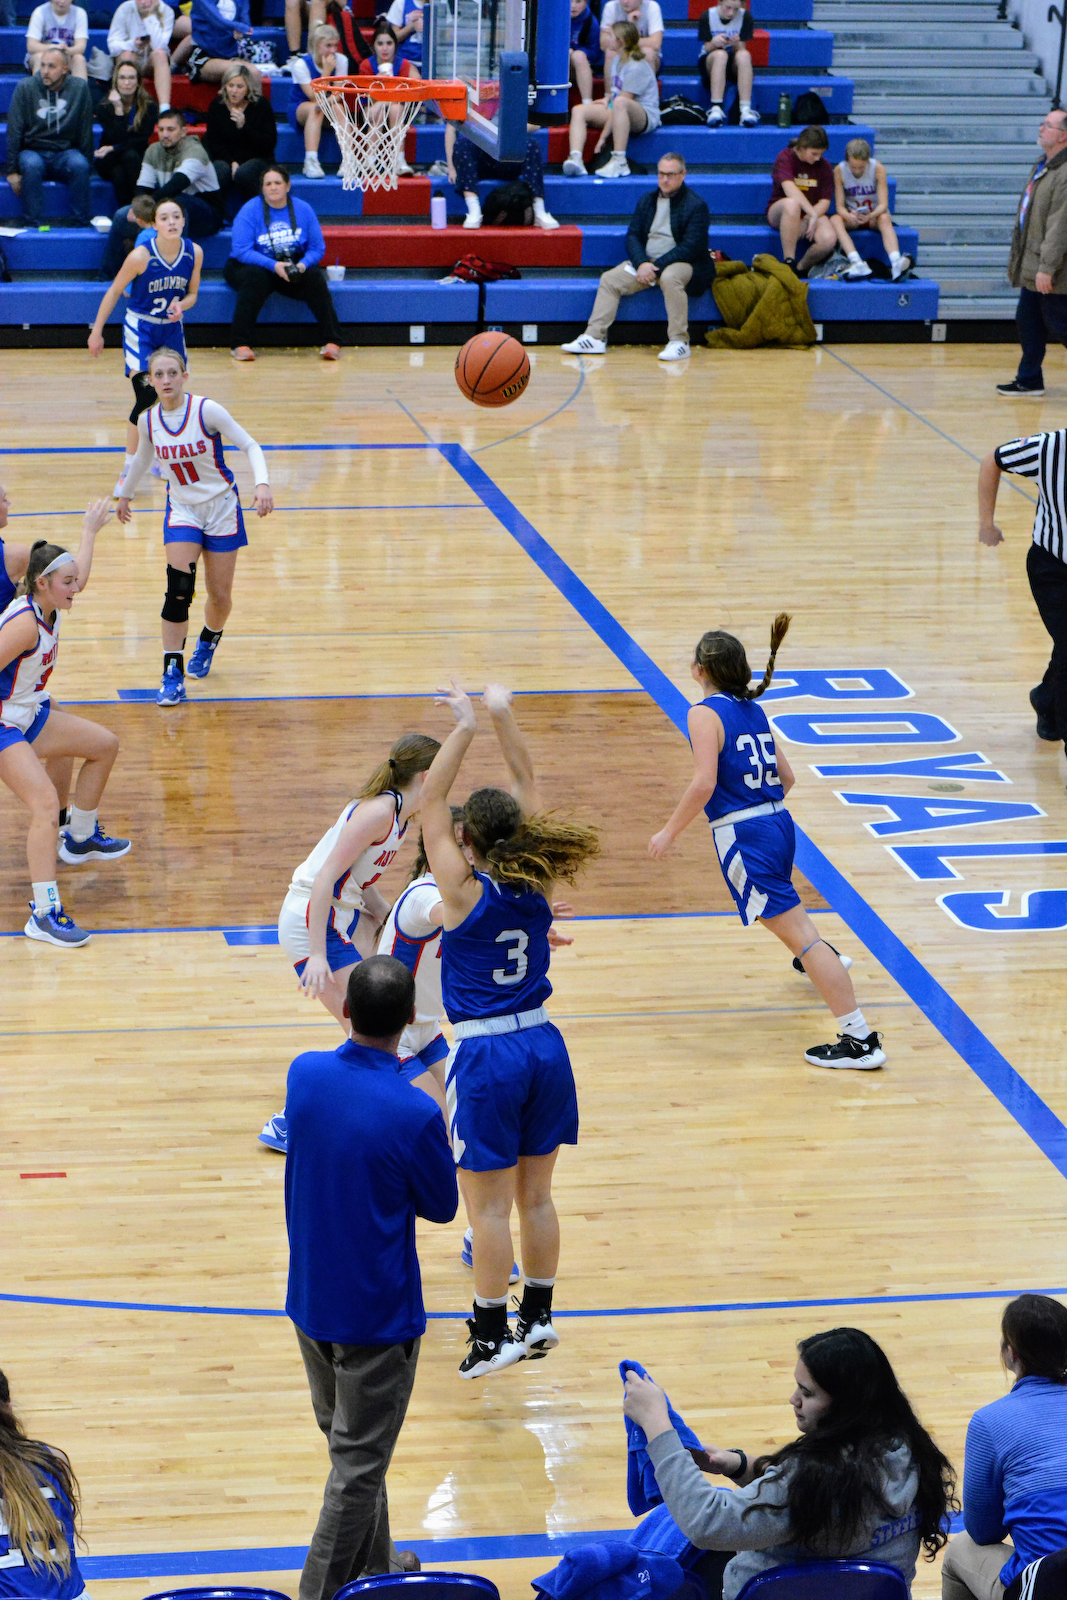 2022-23 GBB at Roncalli 1-26-23 gallery cover photo